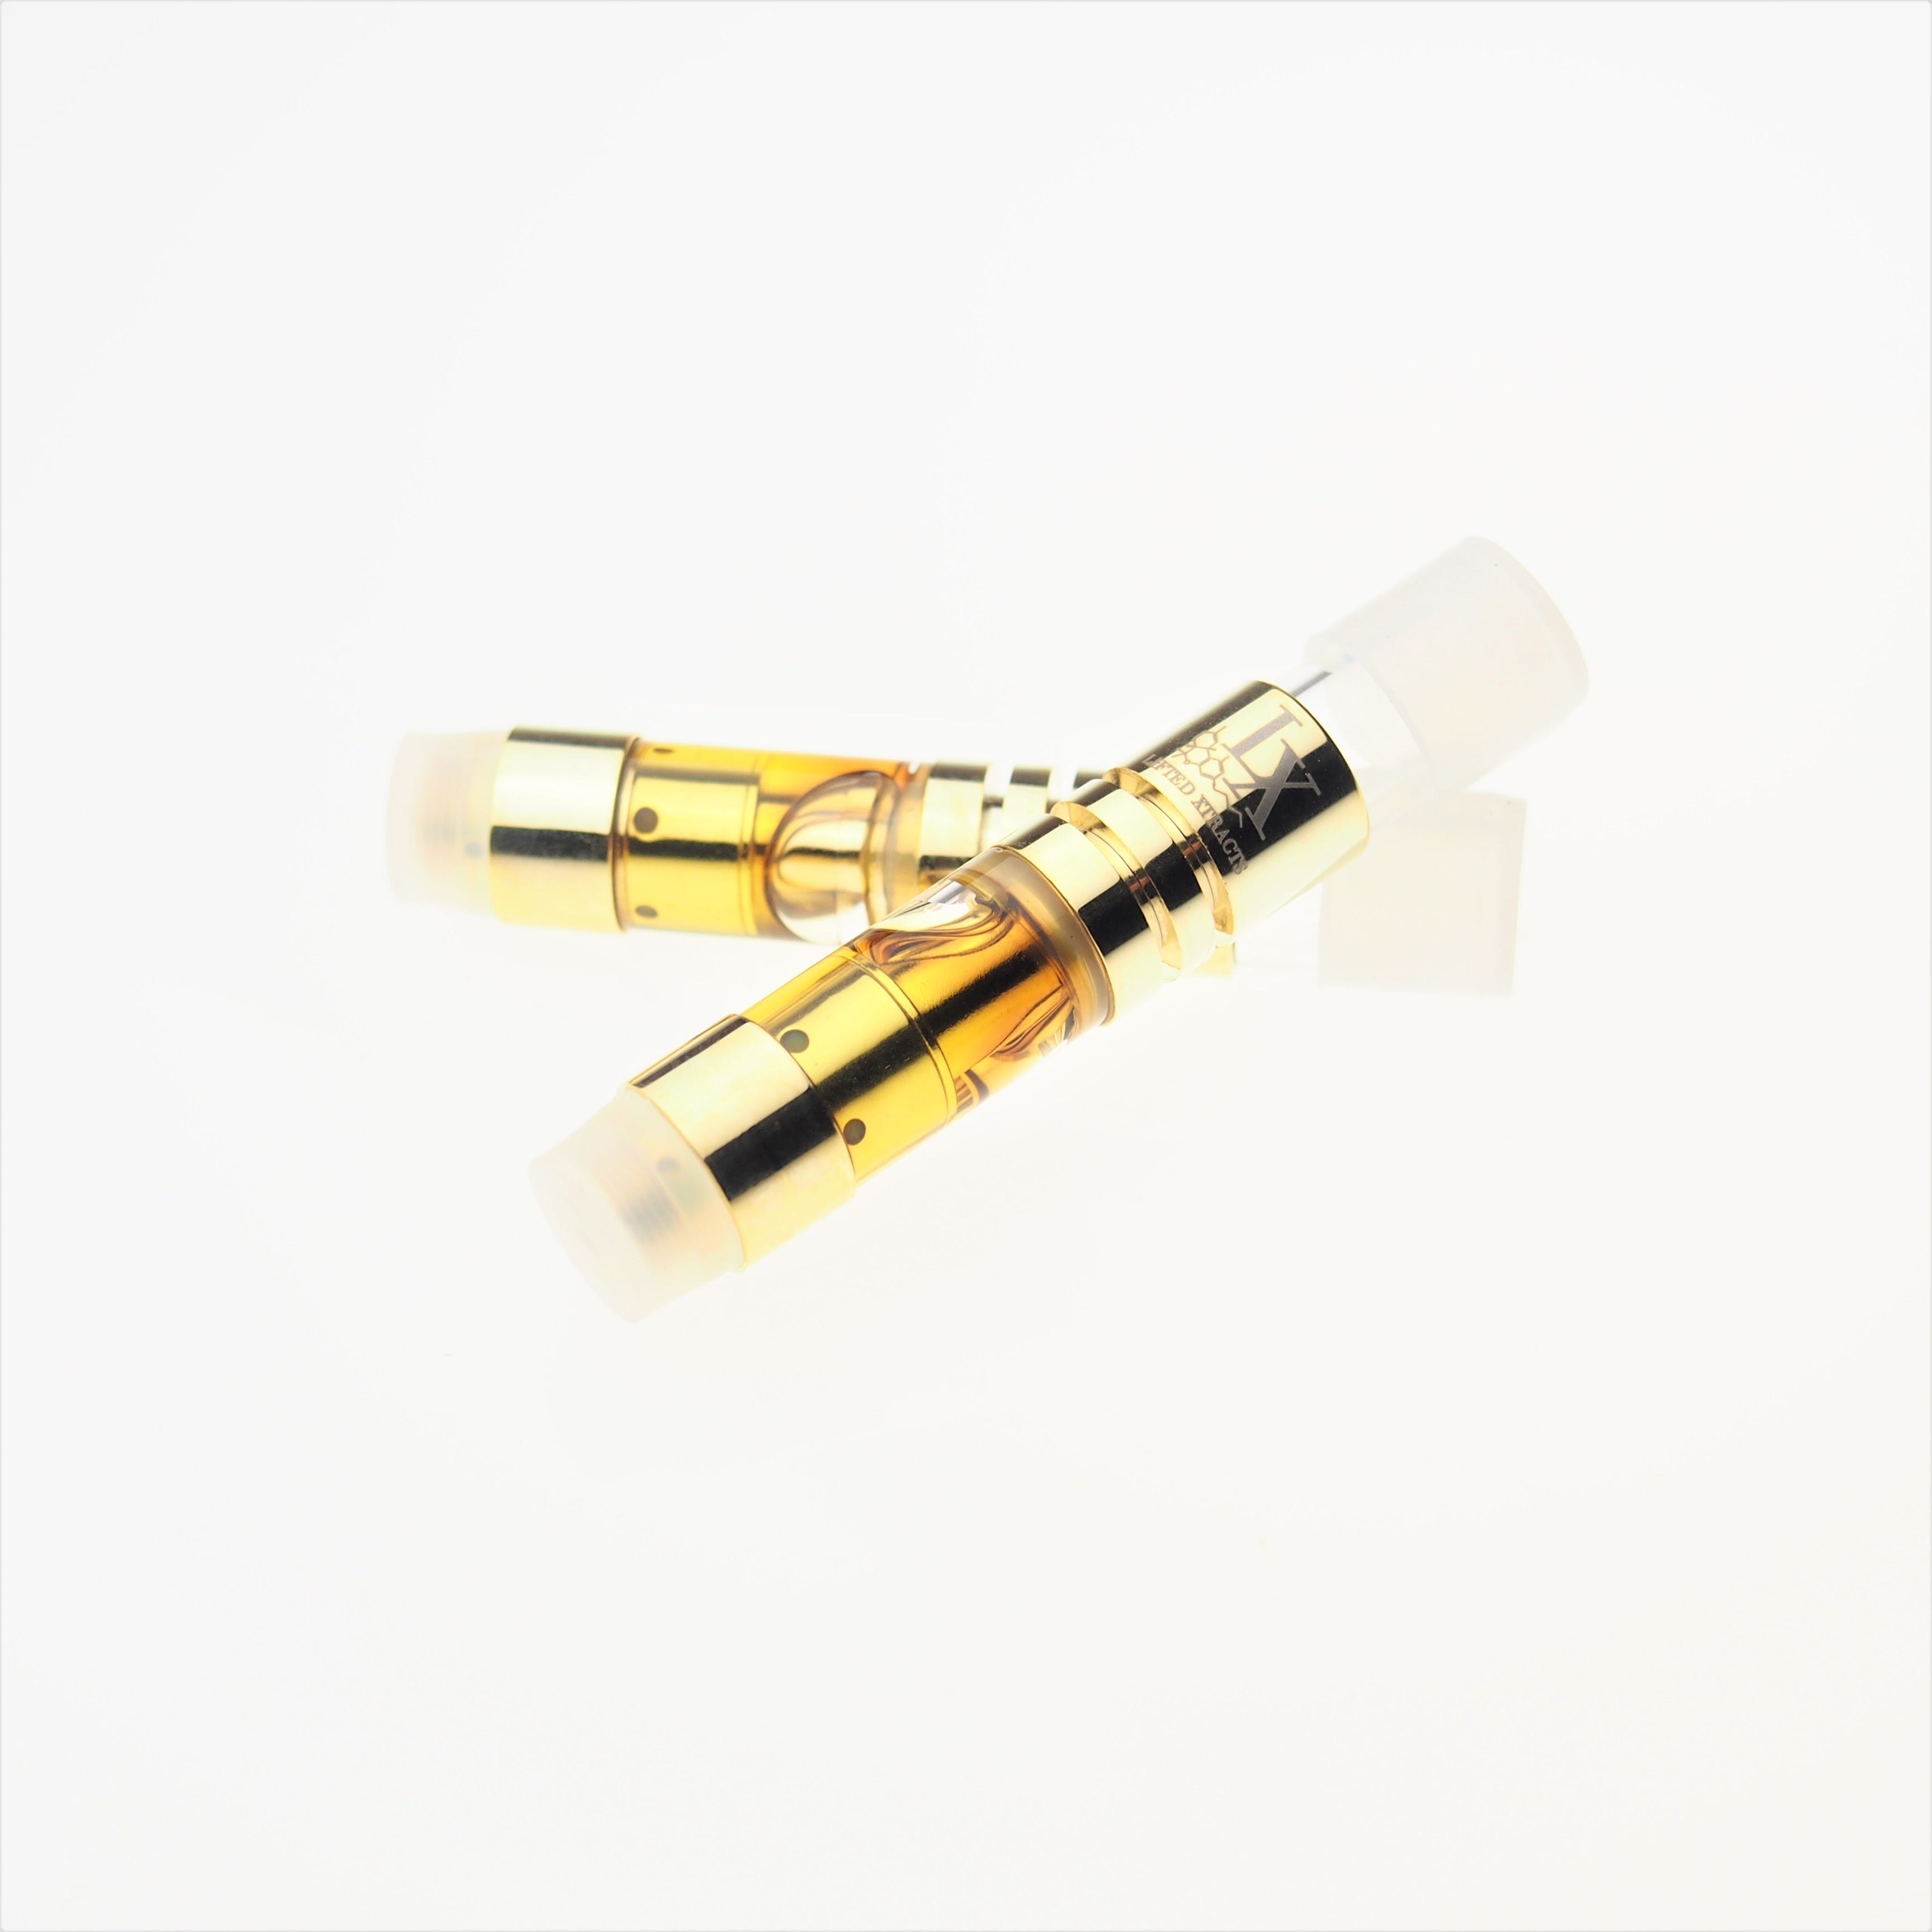 Lifted Extracts Cartridges- Durban Poision